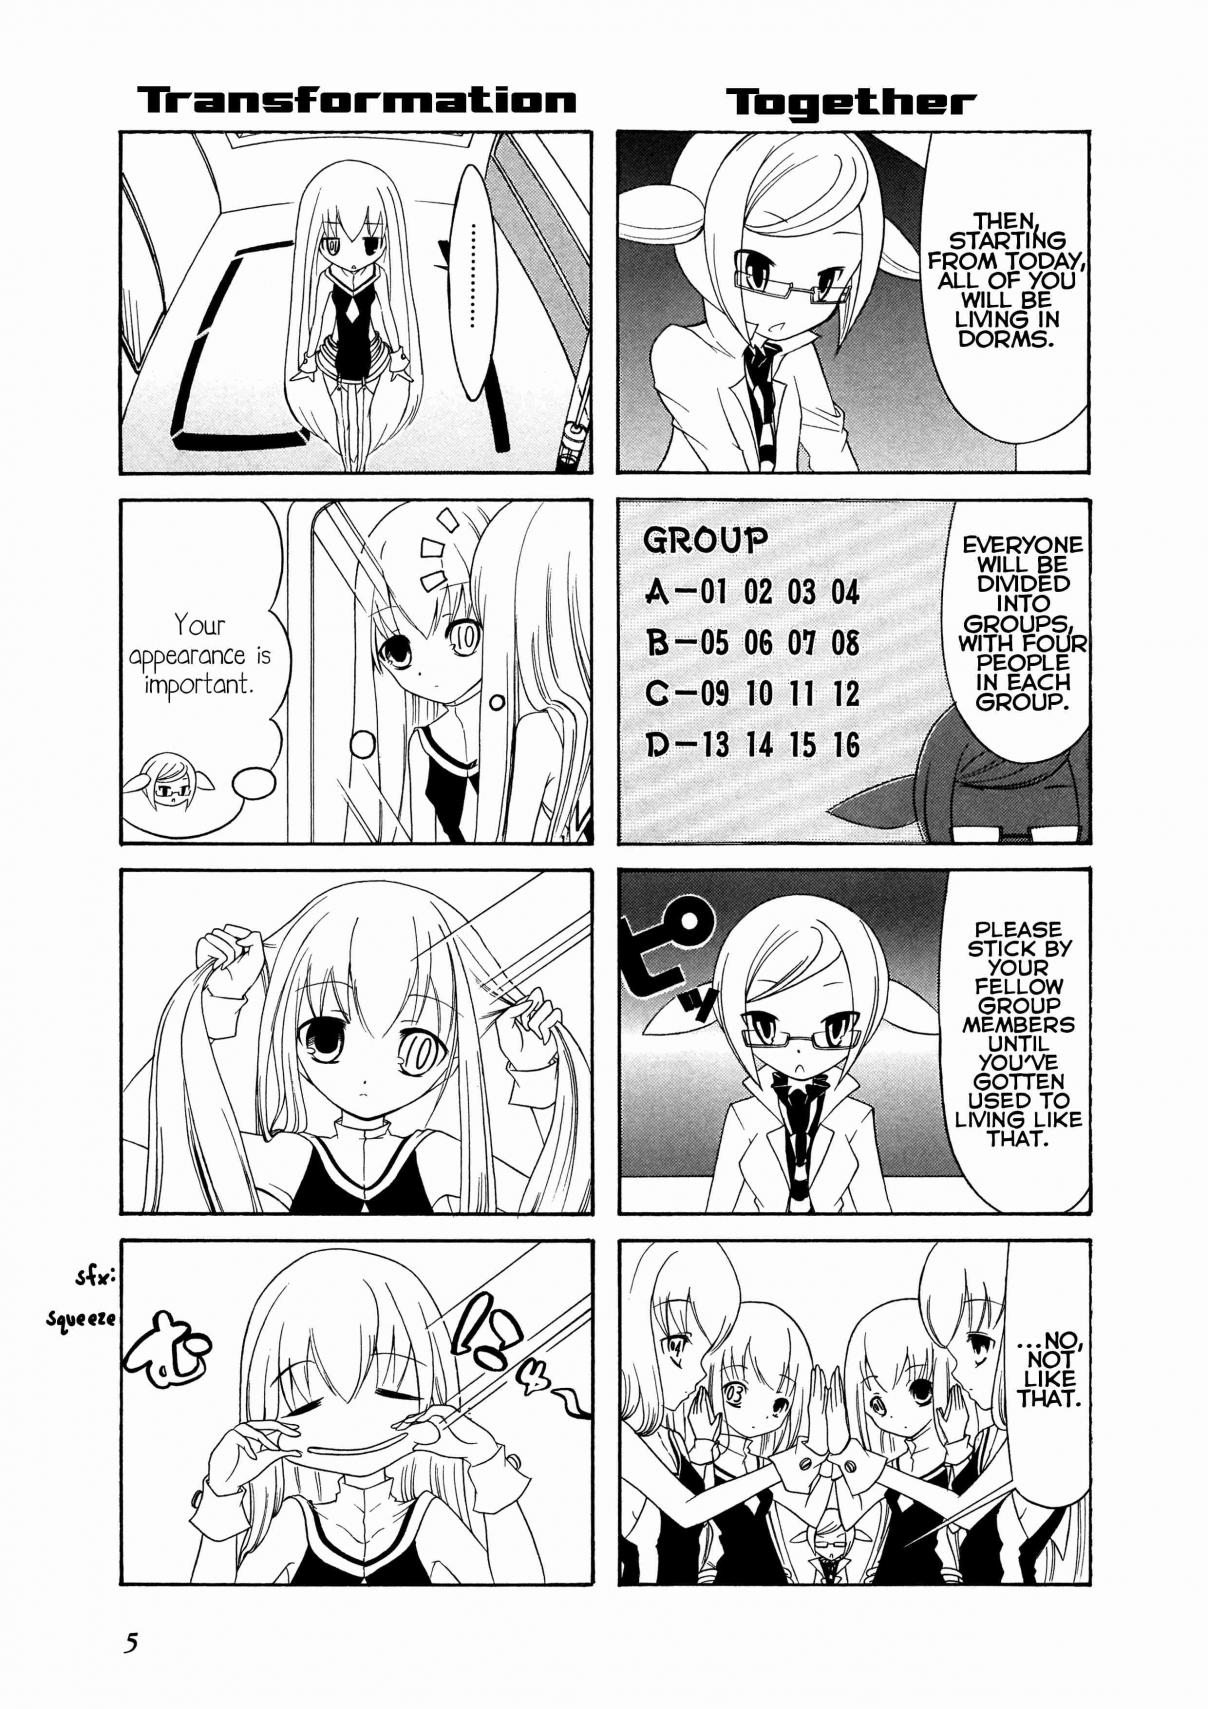 Number Girl Vol. 1 Ch. 1